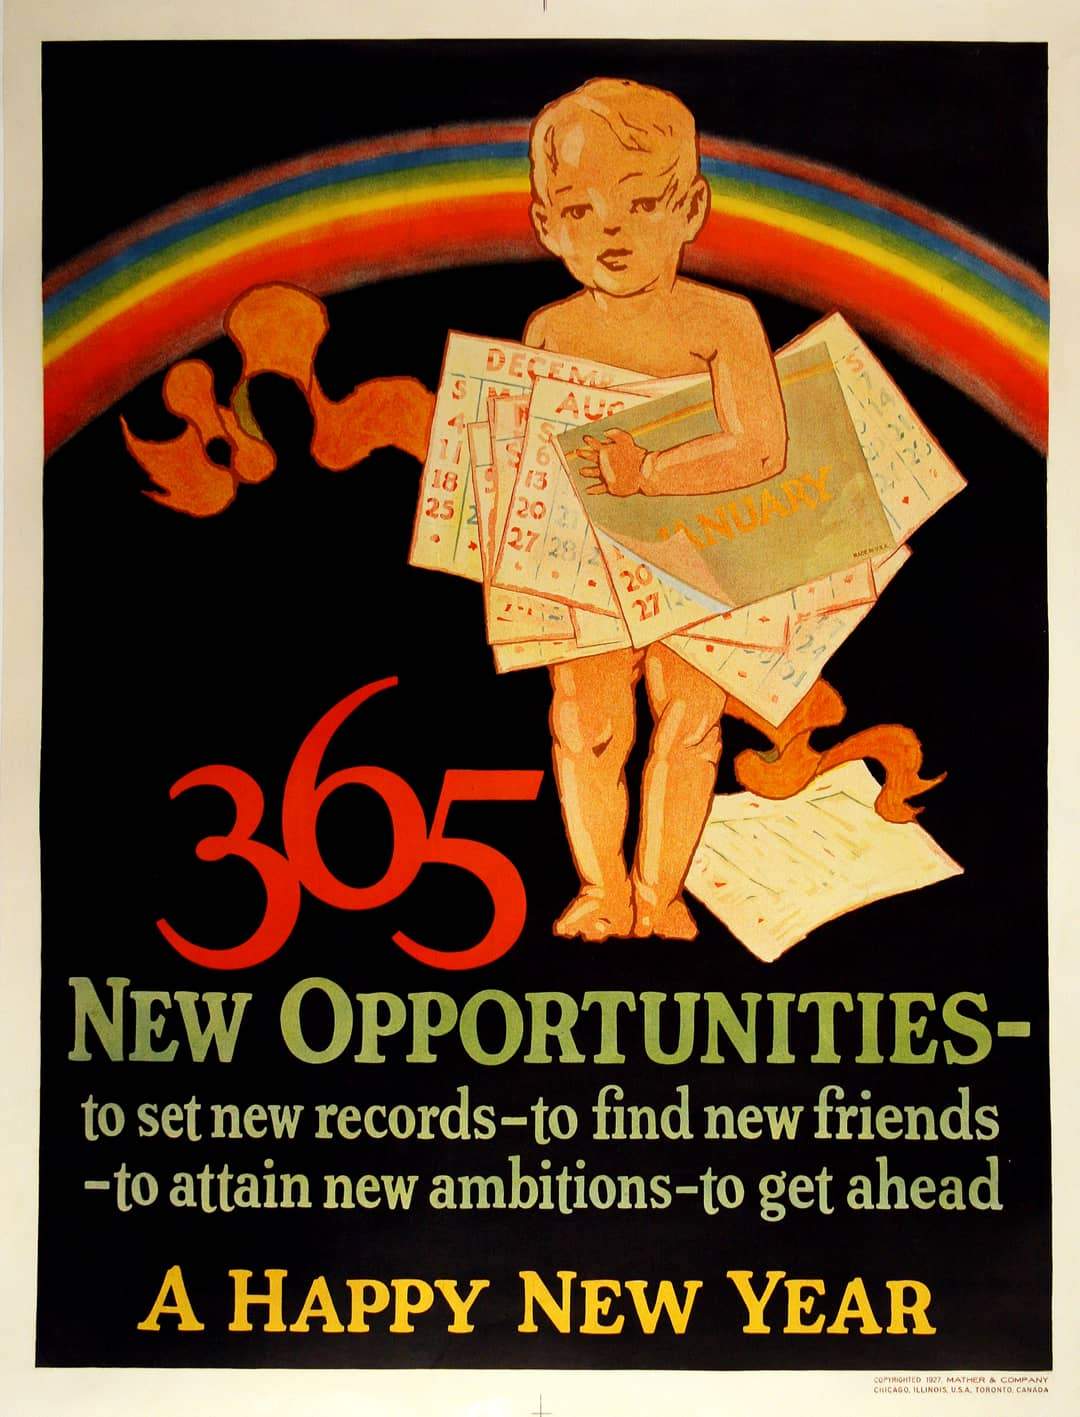 Original Mather Work Incentive Poster 1927 -365 New Opportunities - Happy New Year